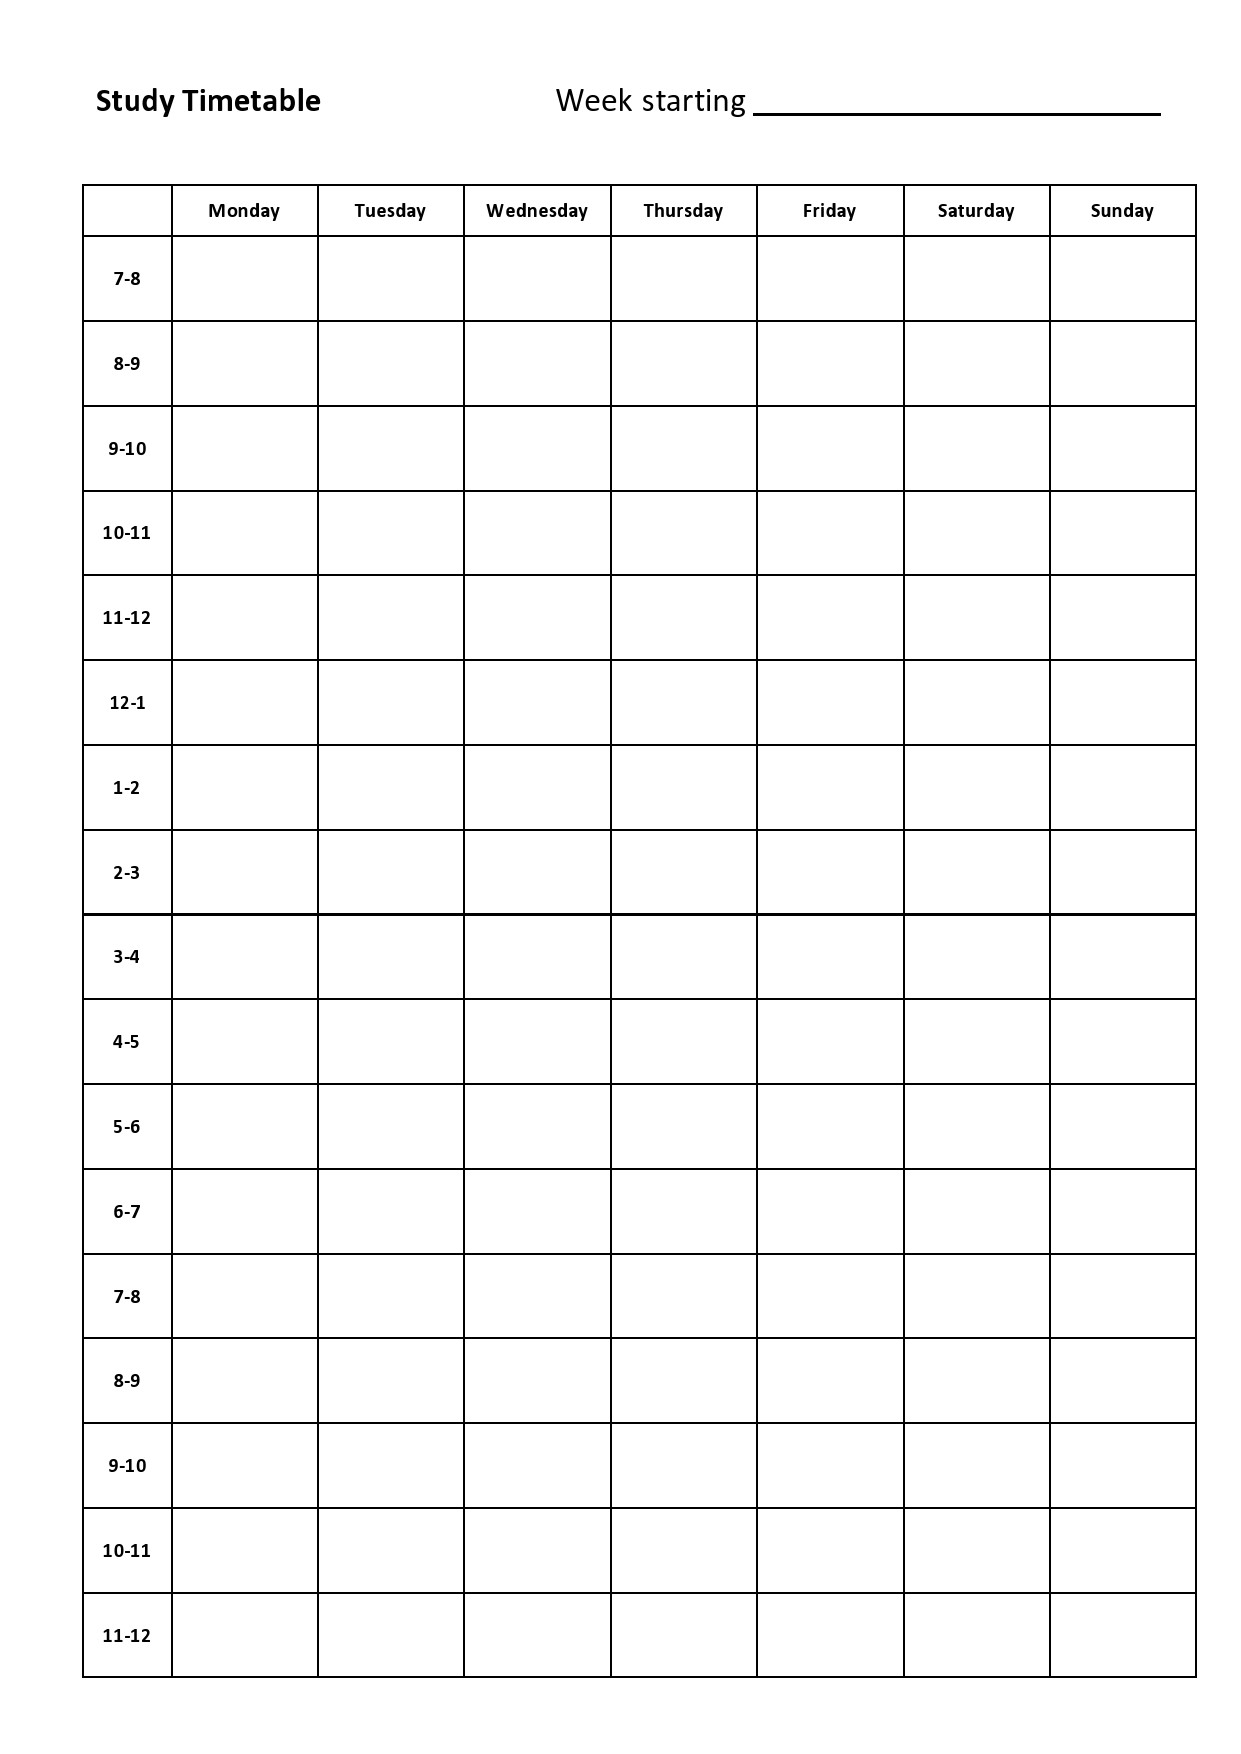 Free time study template 21